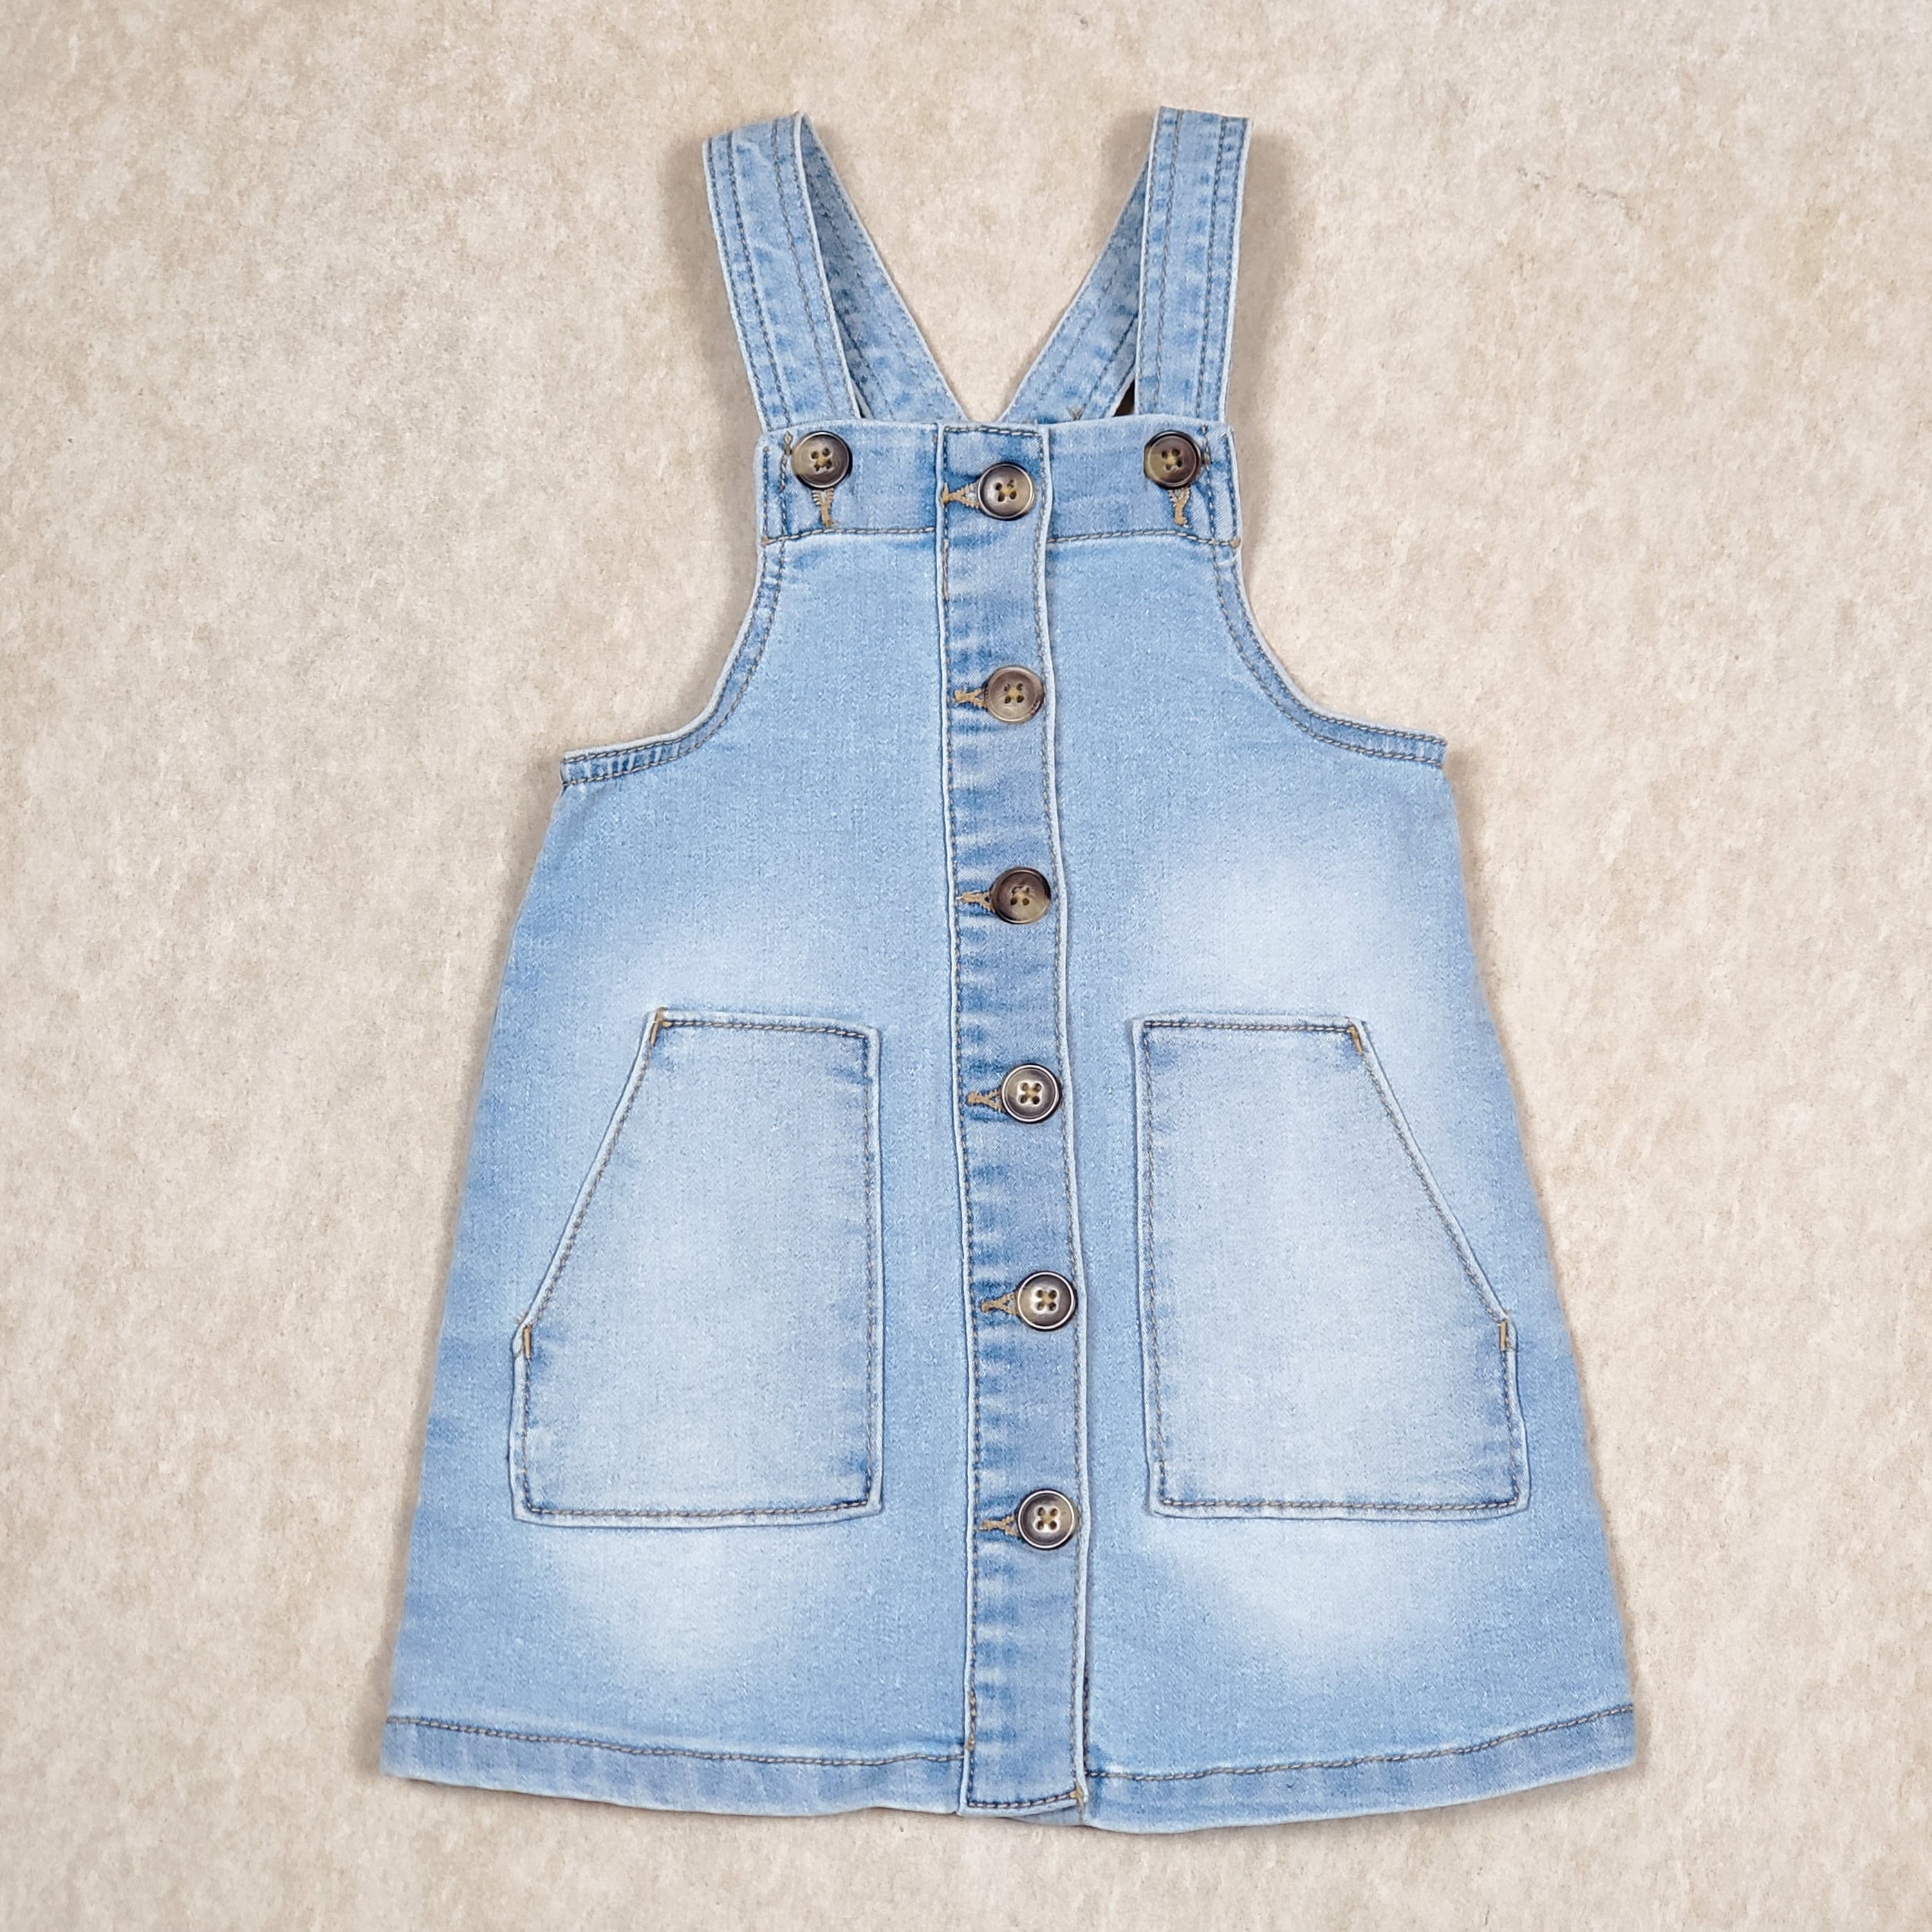 Freshen up your little one's spring and summer wardrobe with this sweet  pinafore set www.matalanme.com #matalanme #fa… | Girls denim, Kids fashion, Denim  pinafore